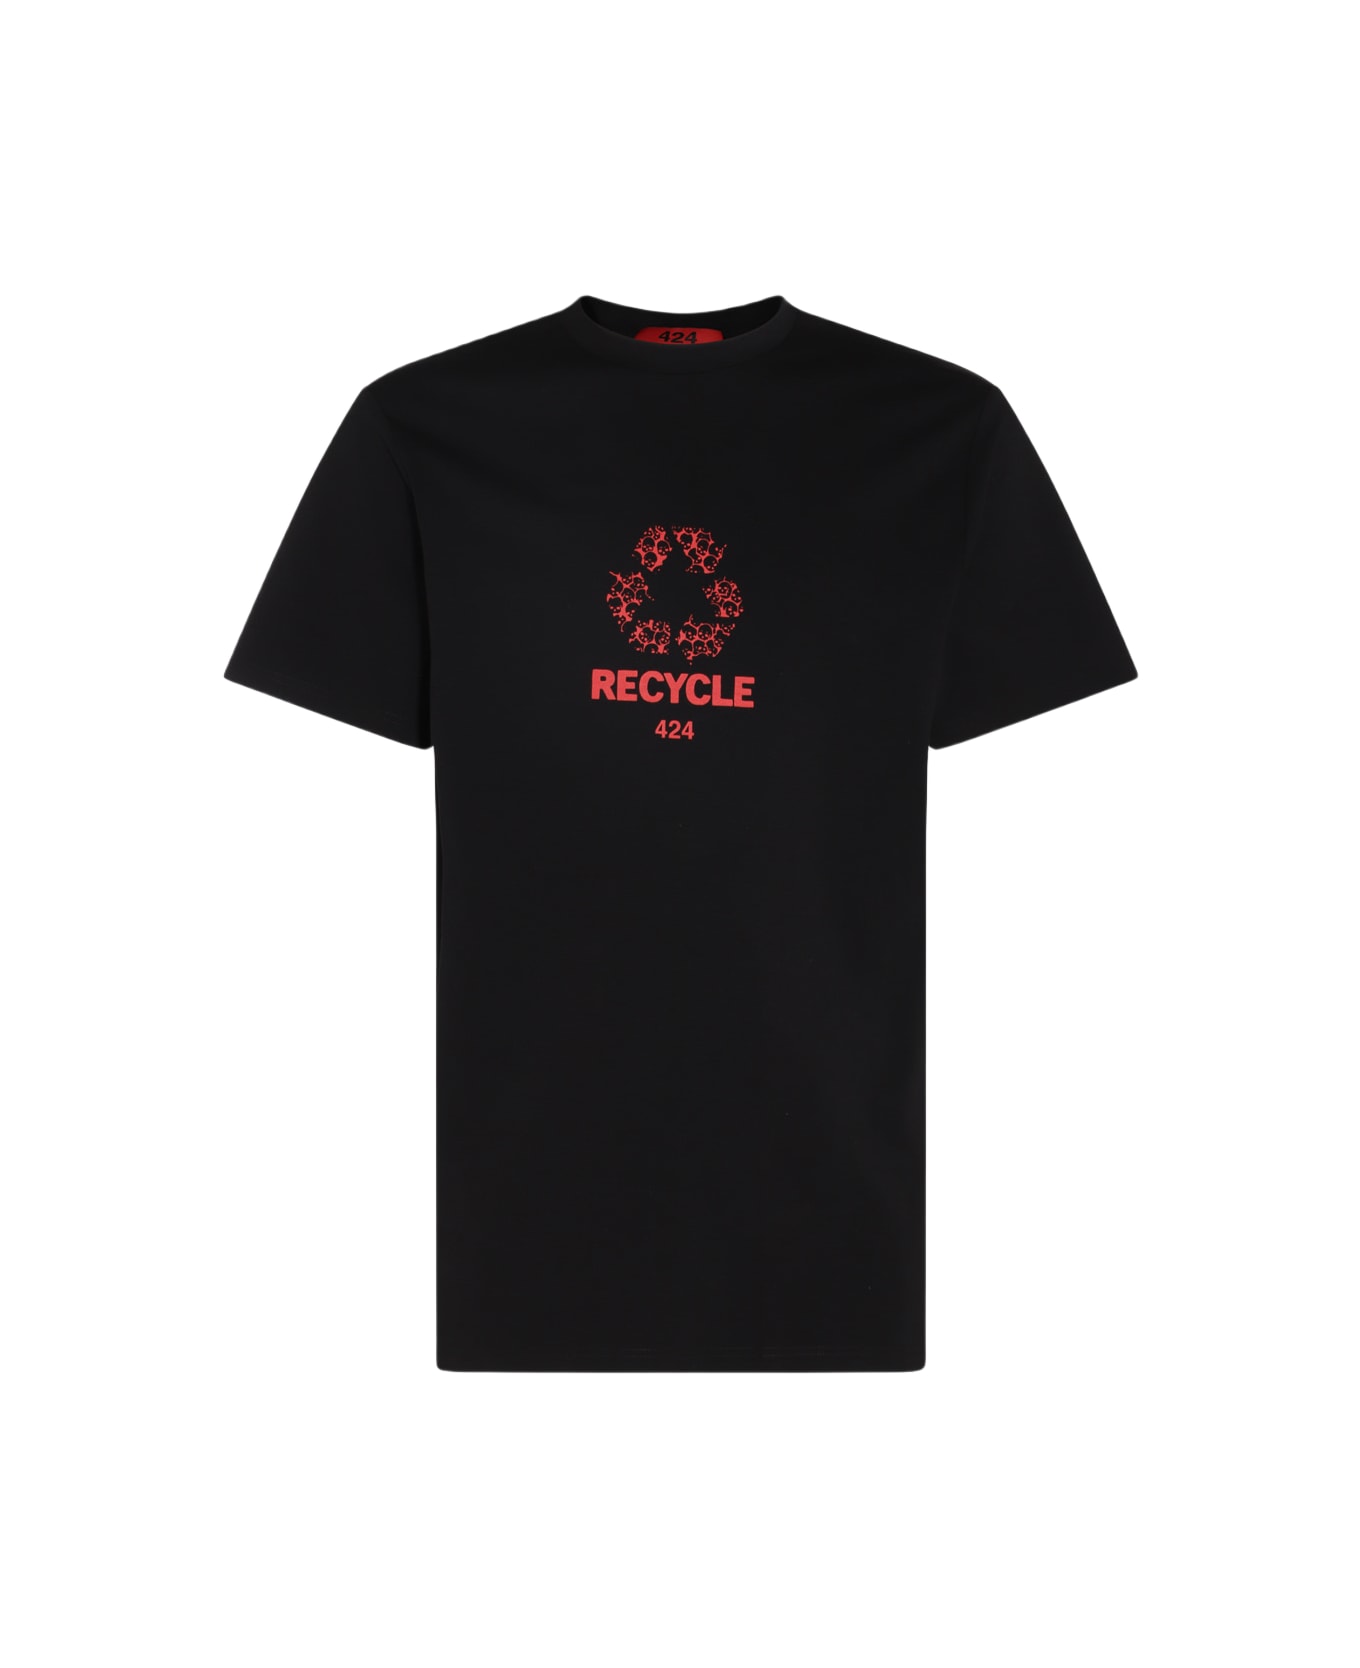 FourTwoFour on Fairfax Black And Red Cotton Blend T-shirt - Black シャツ